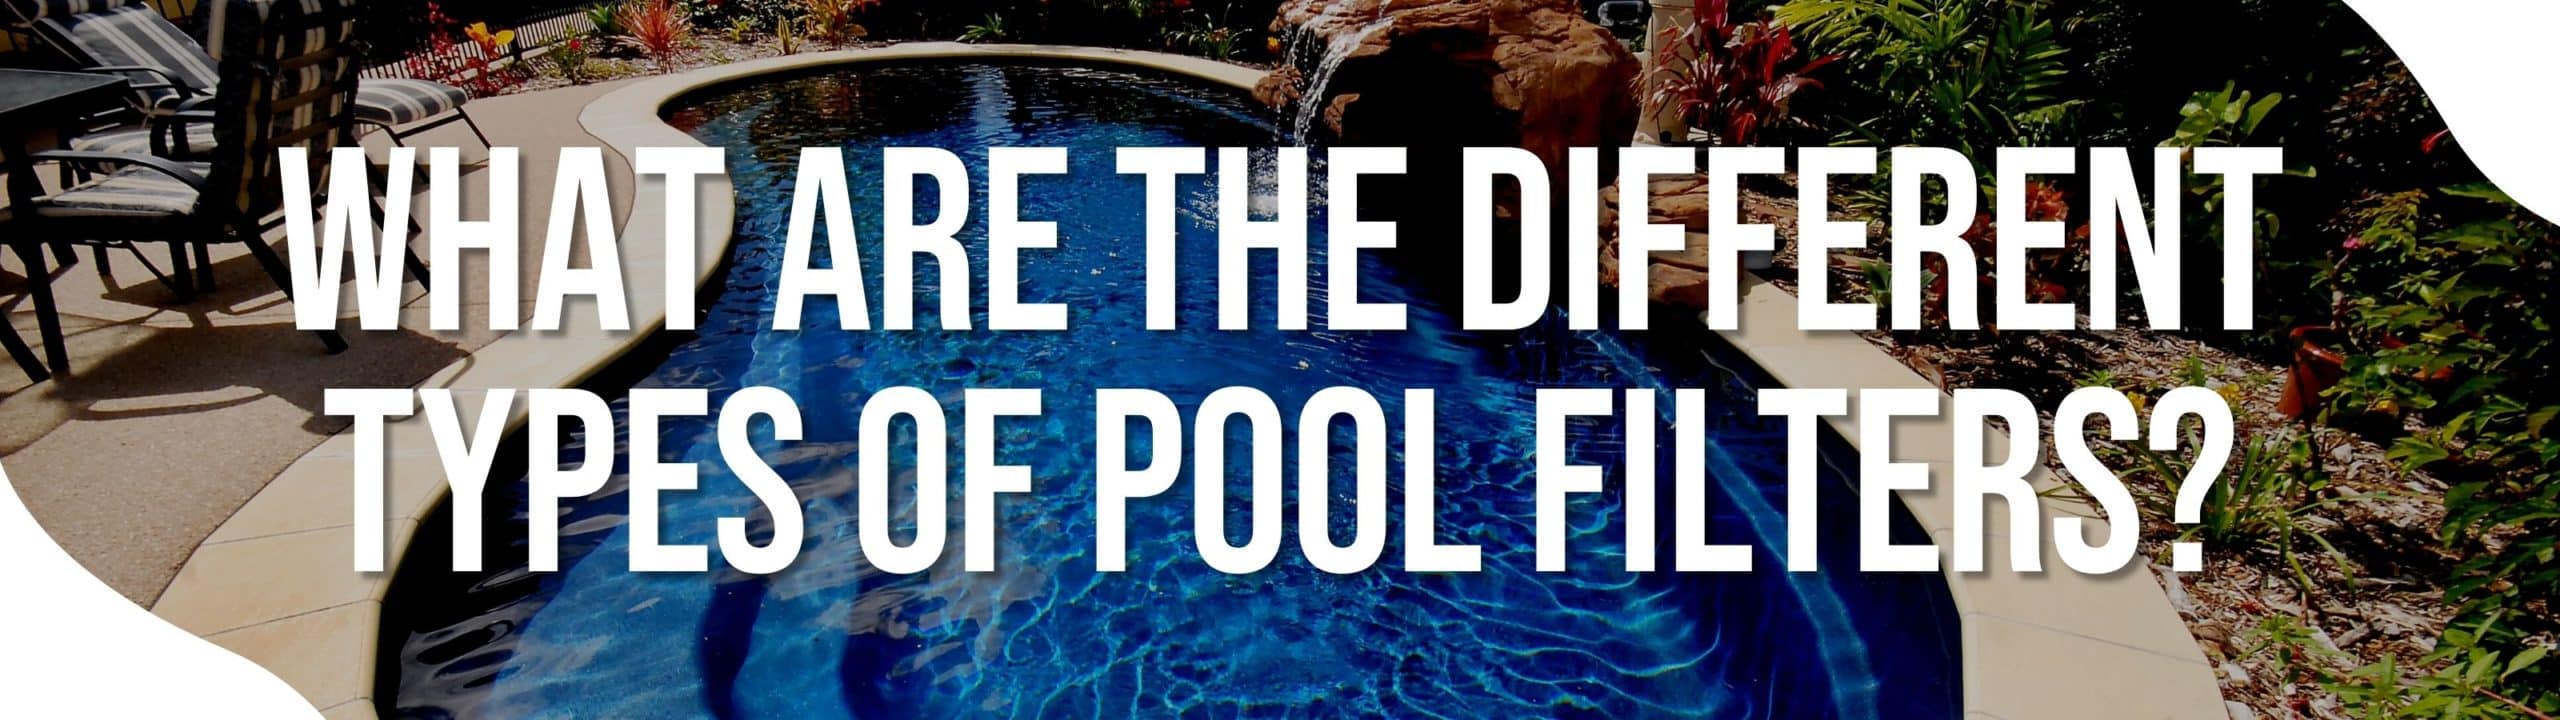 What Are The Different Types Of Pool Filters